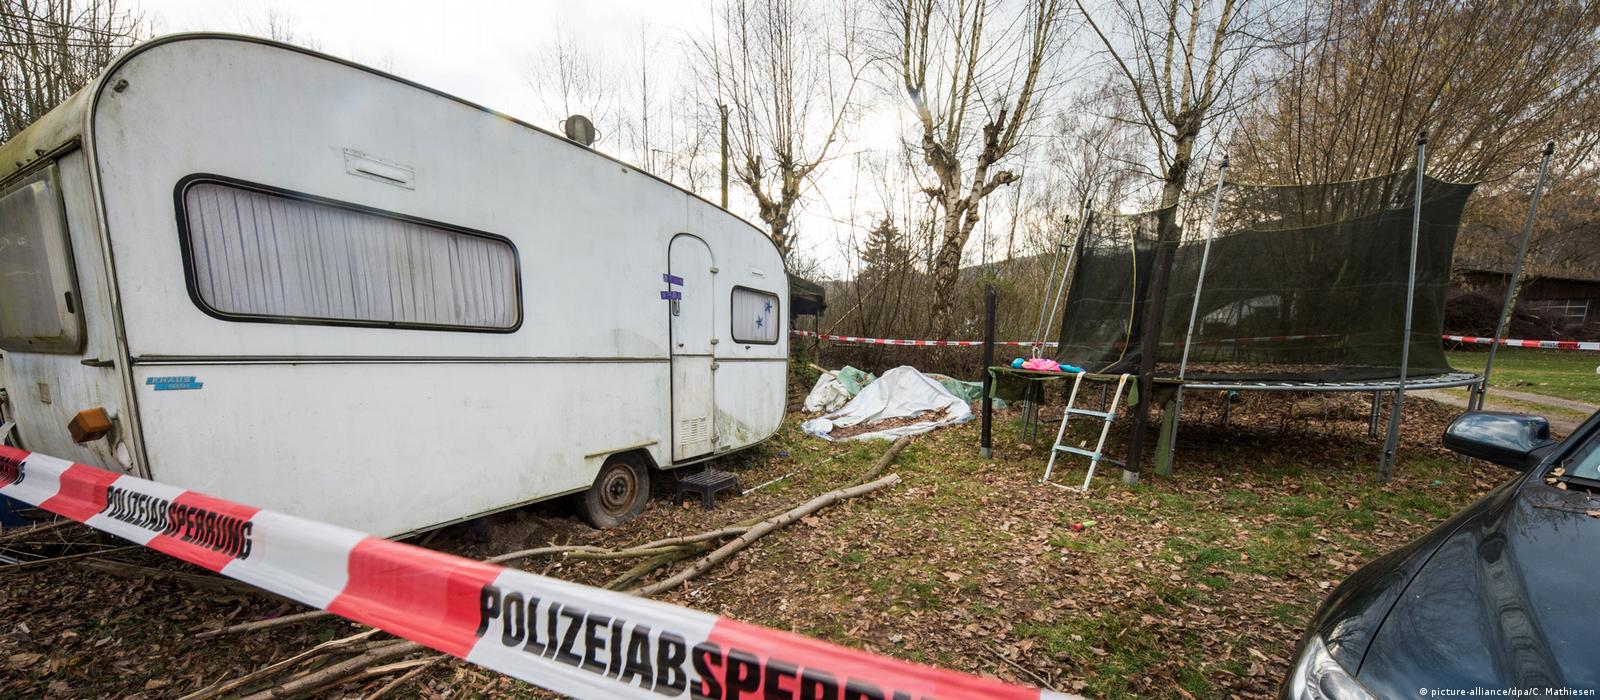 Sex 12yars In Com - Child abuse at campsite: How authorities failed the victims â€“ DW â€“  09/05/2019